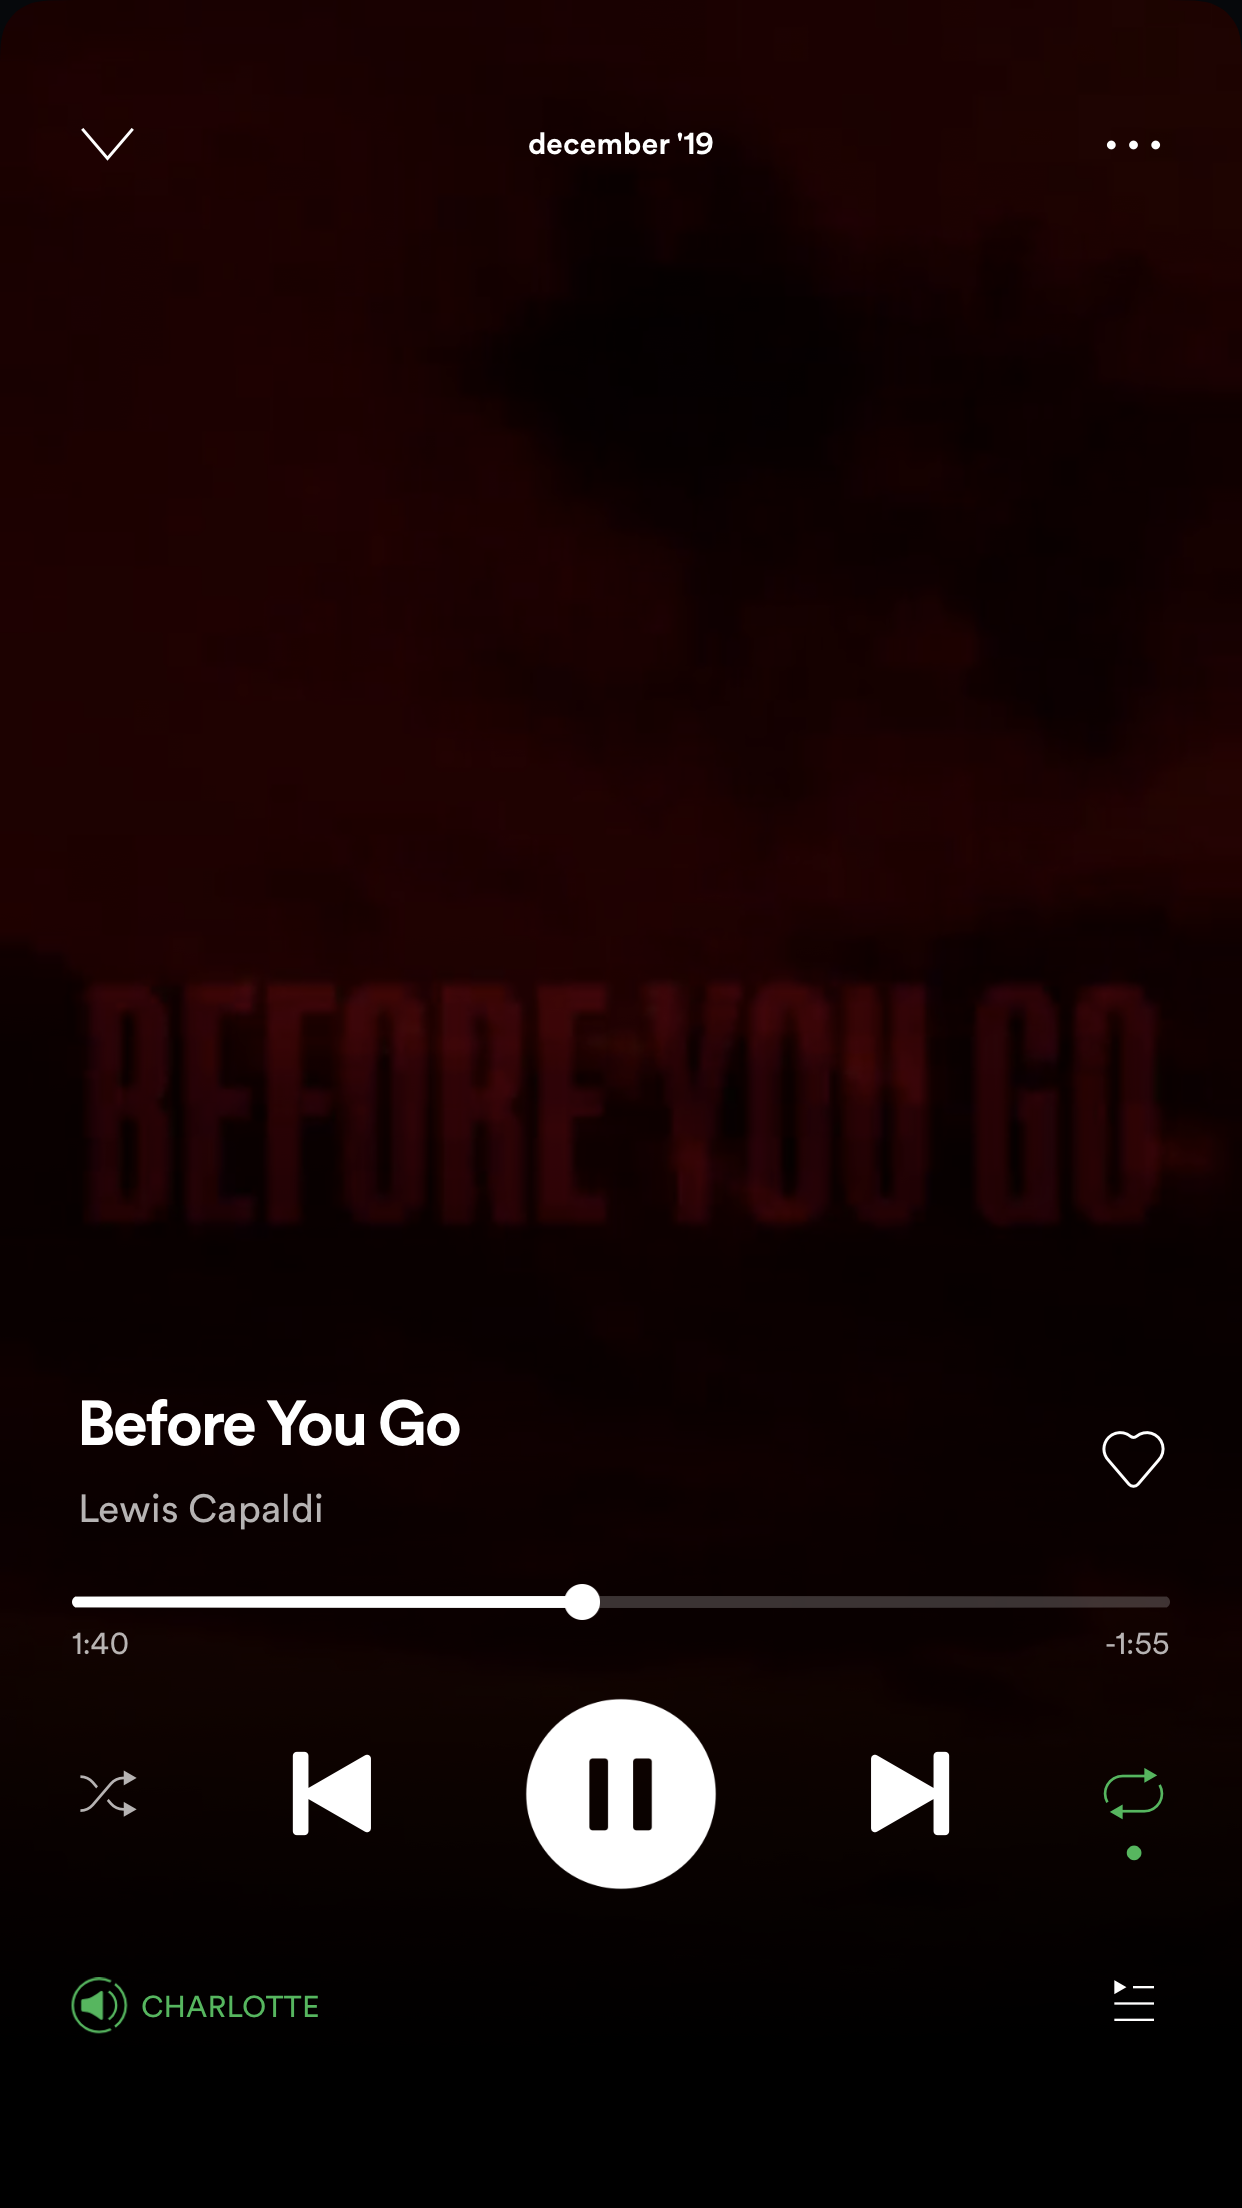 before you go